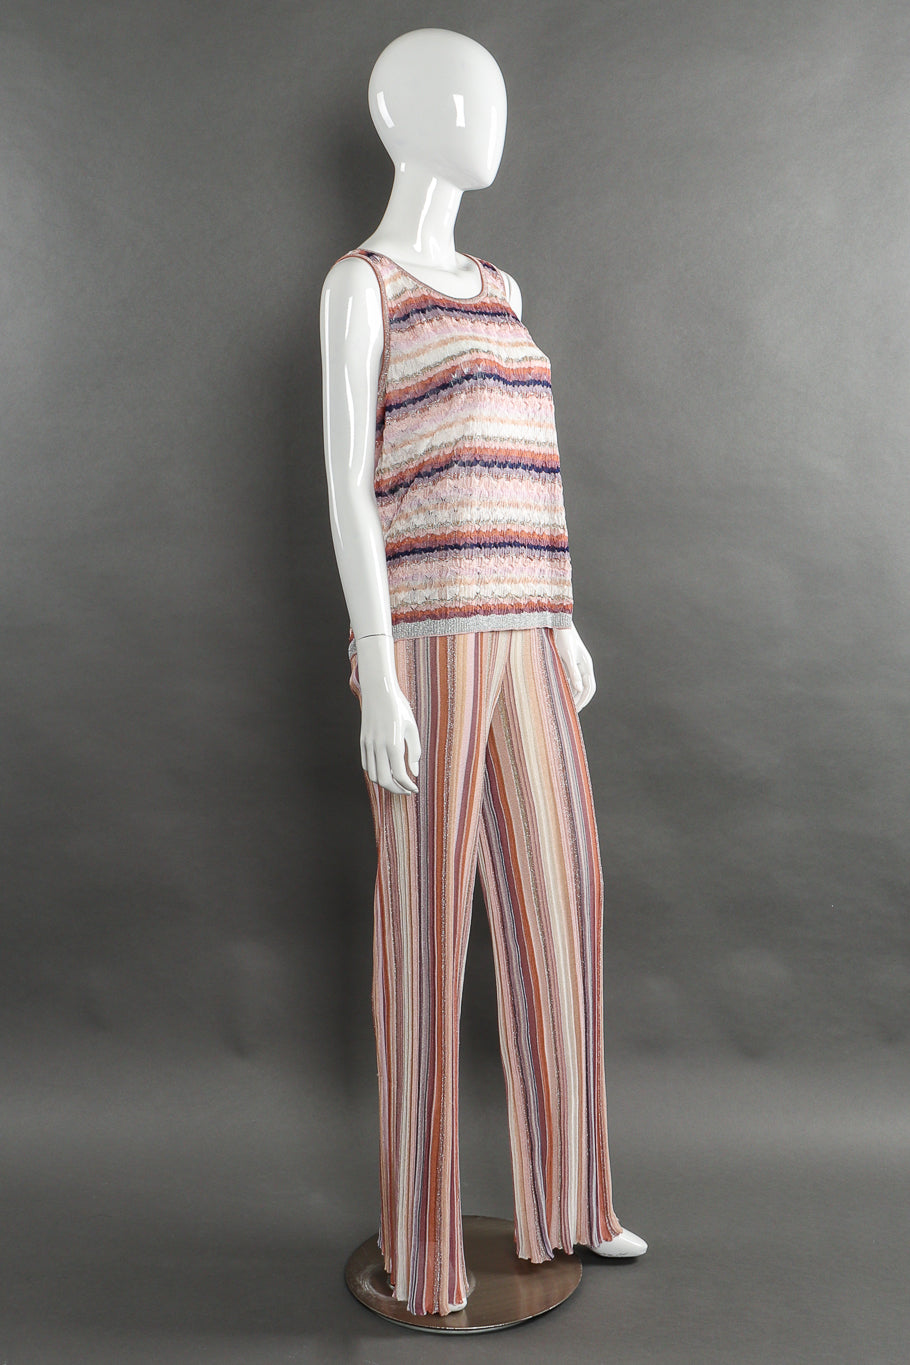 Missoni Striped Knit Duster, Tank, and Pants Set 3/4 view of tank and pant on mannequin @Recessla